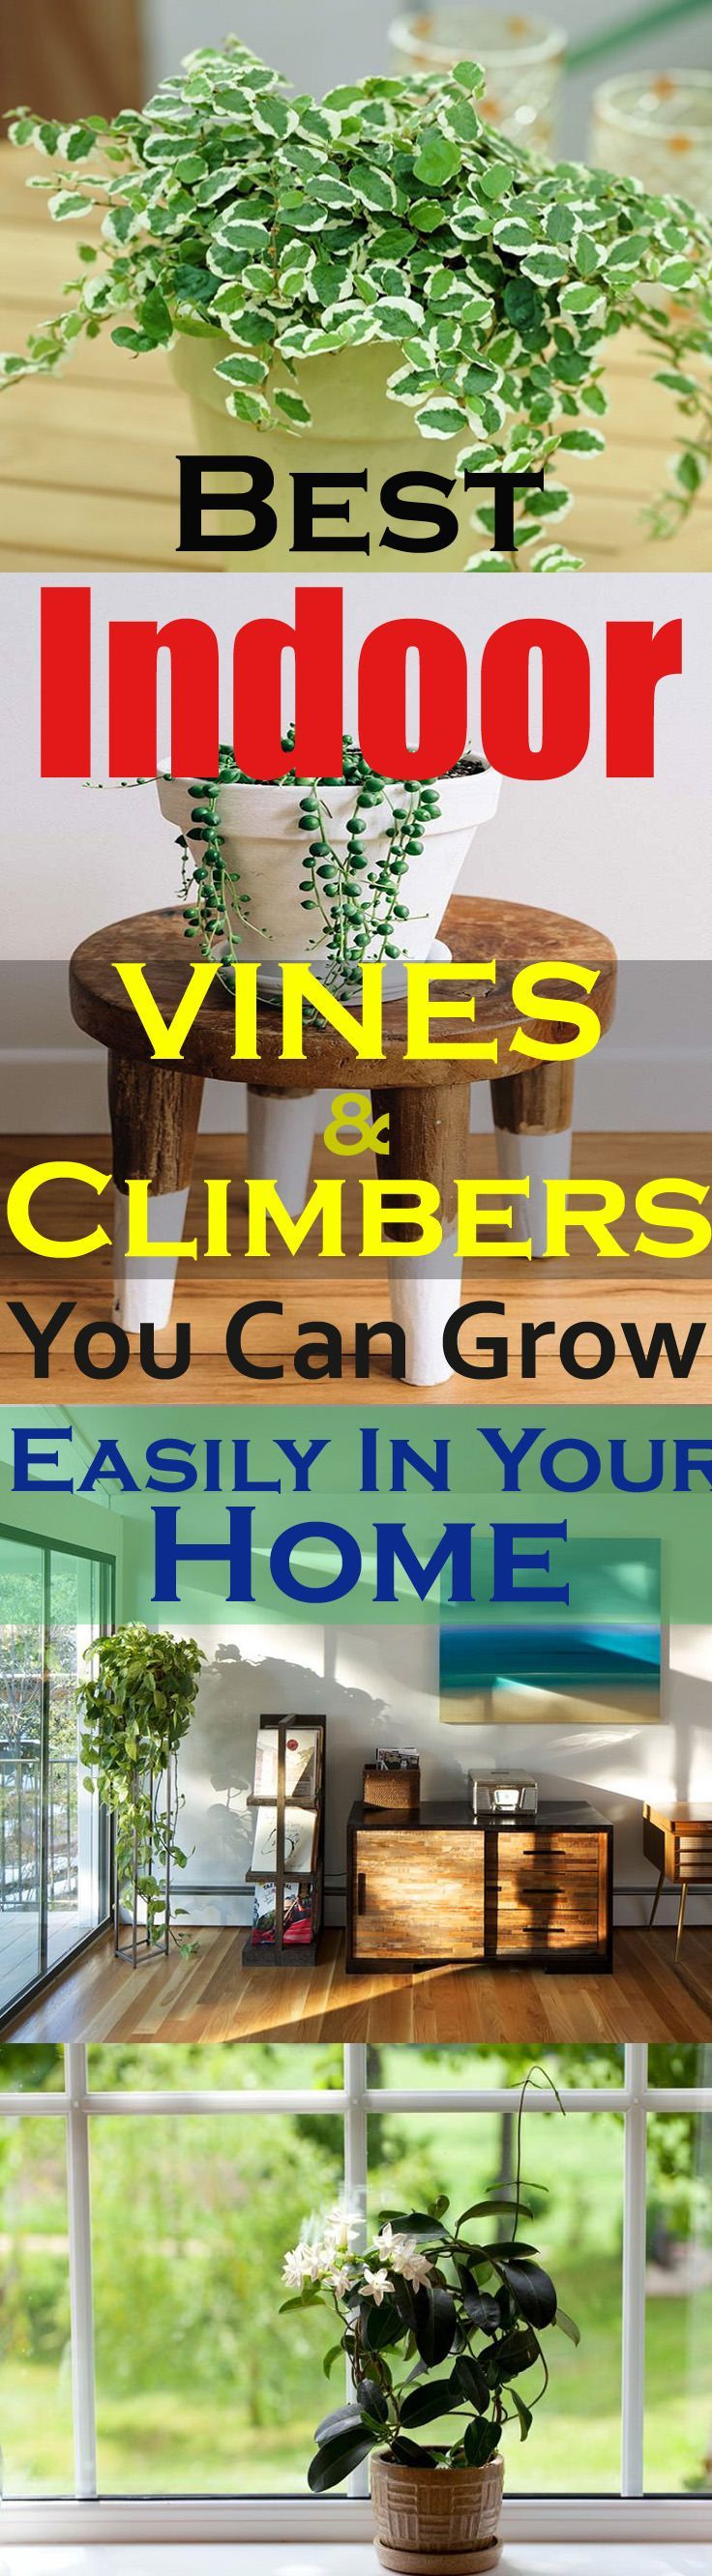 Love growing plants indoors? Some of the best indoor vines and climbers that are easy to grow listed here. Must check out!